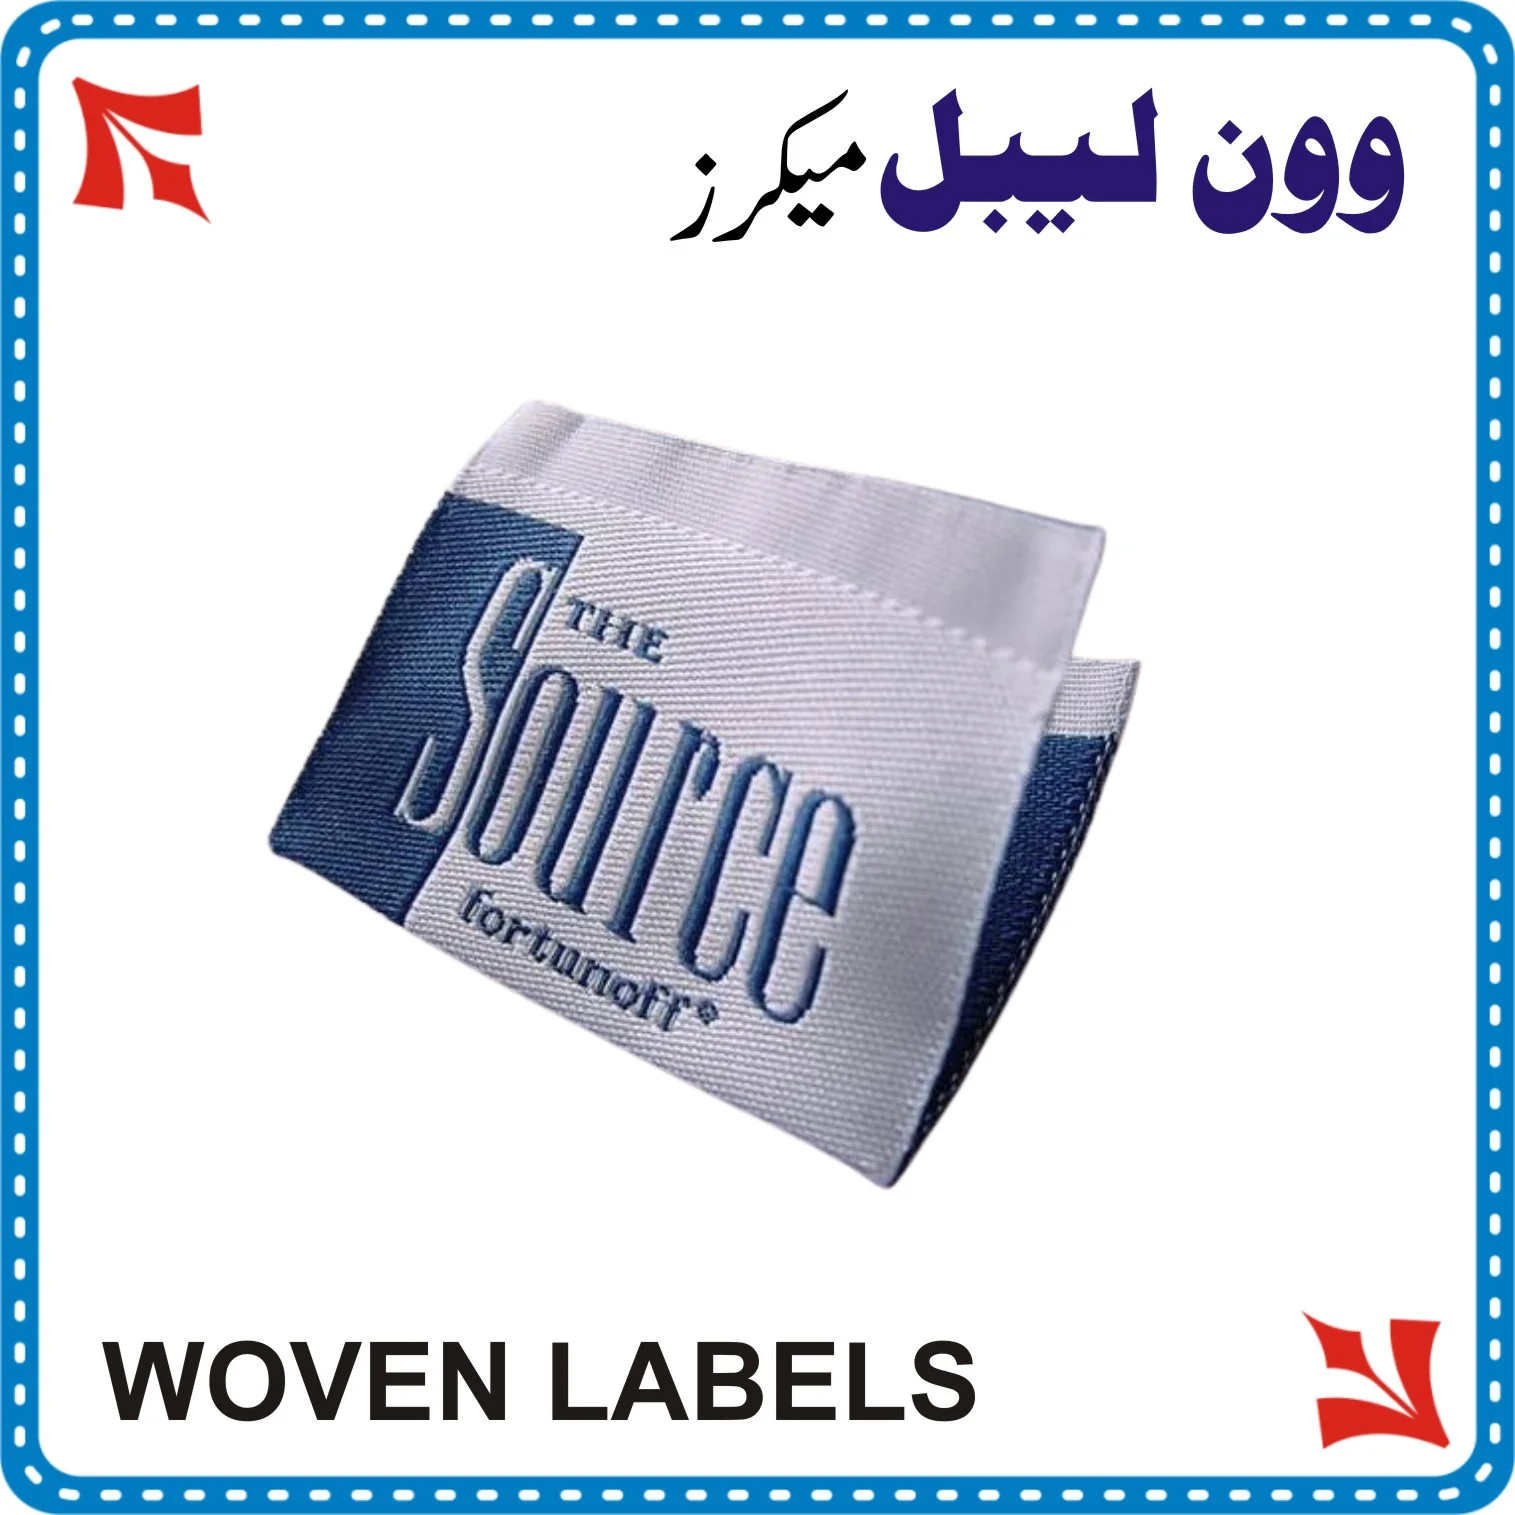 WOVEN LABELS MANUFACTURERS IN PAKISTAN